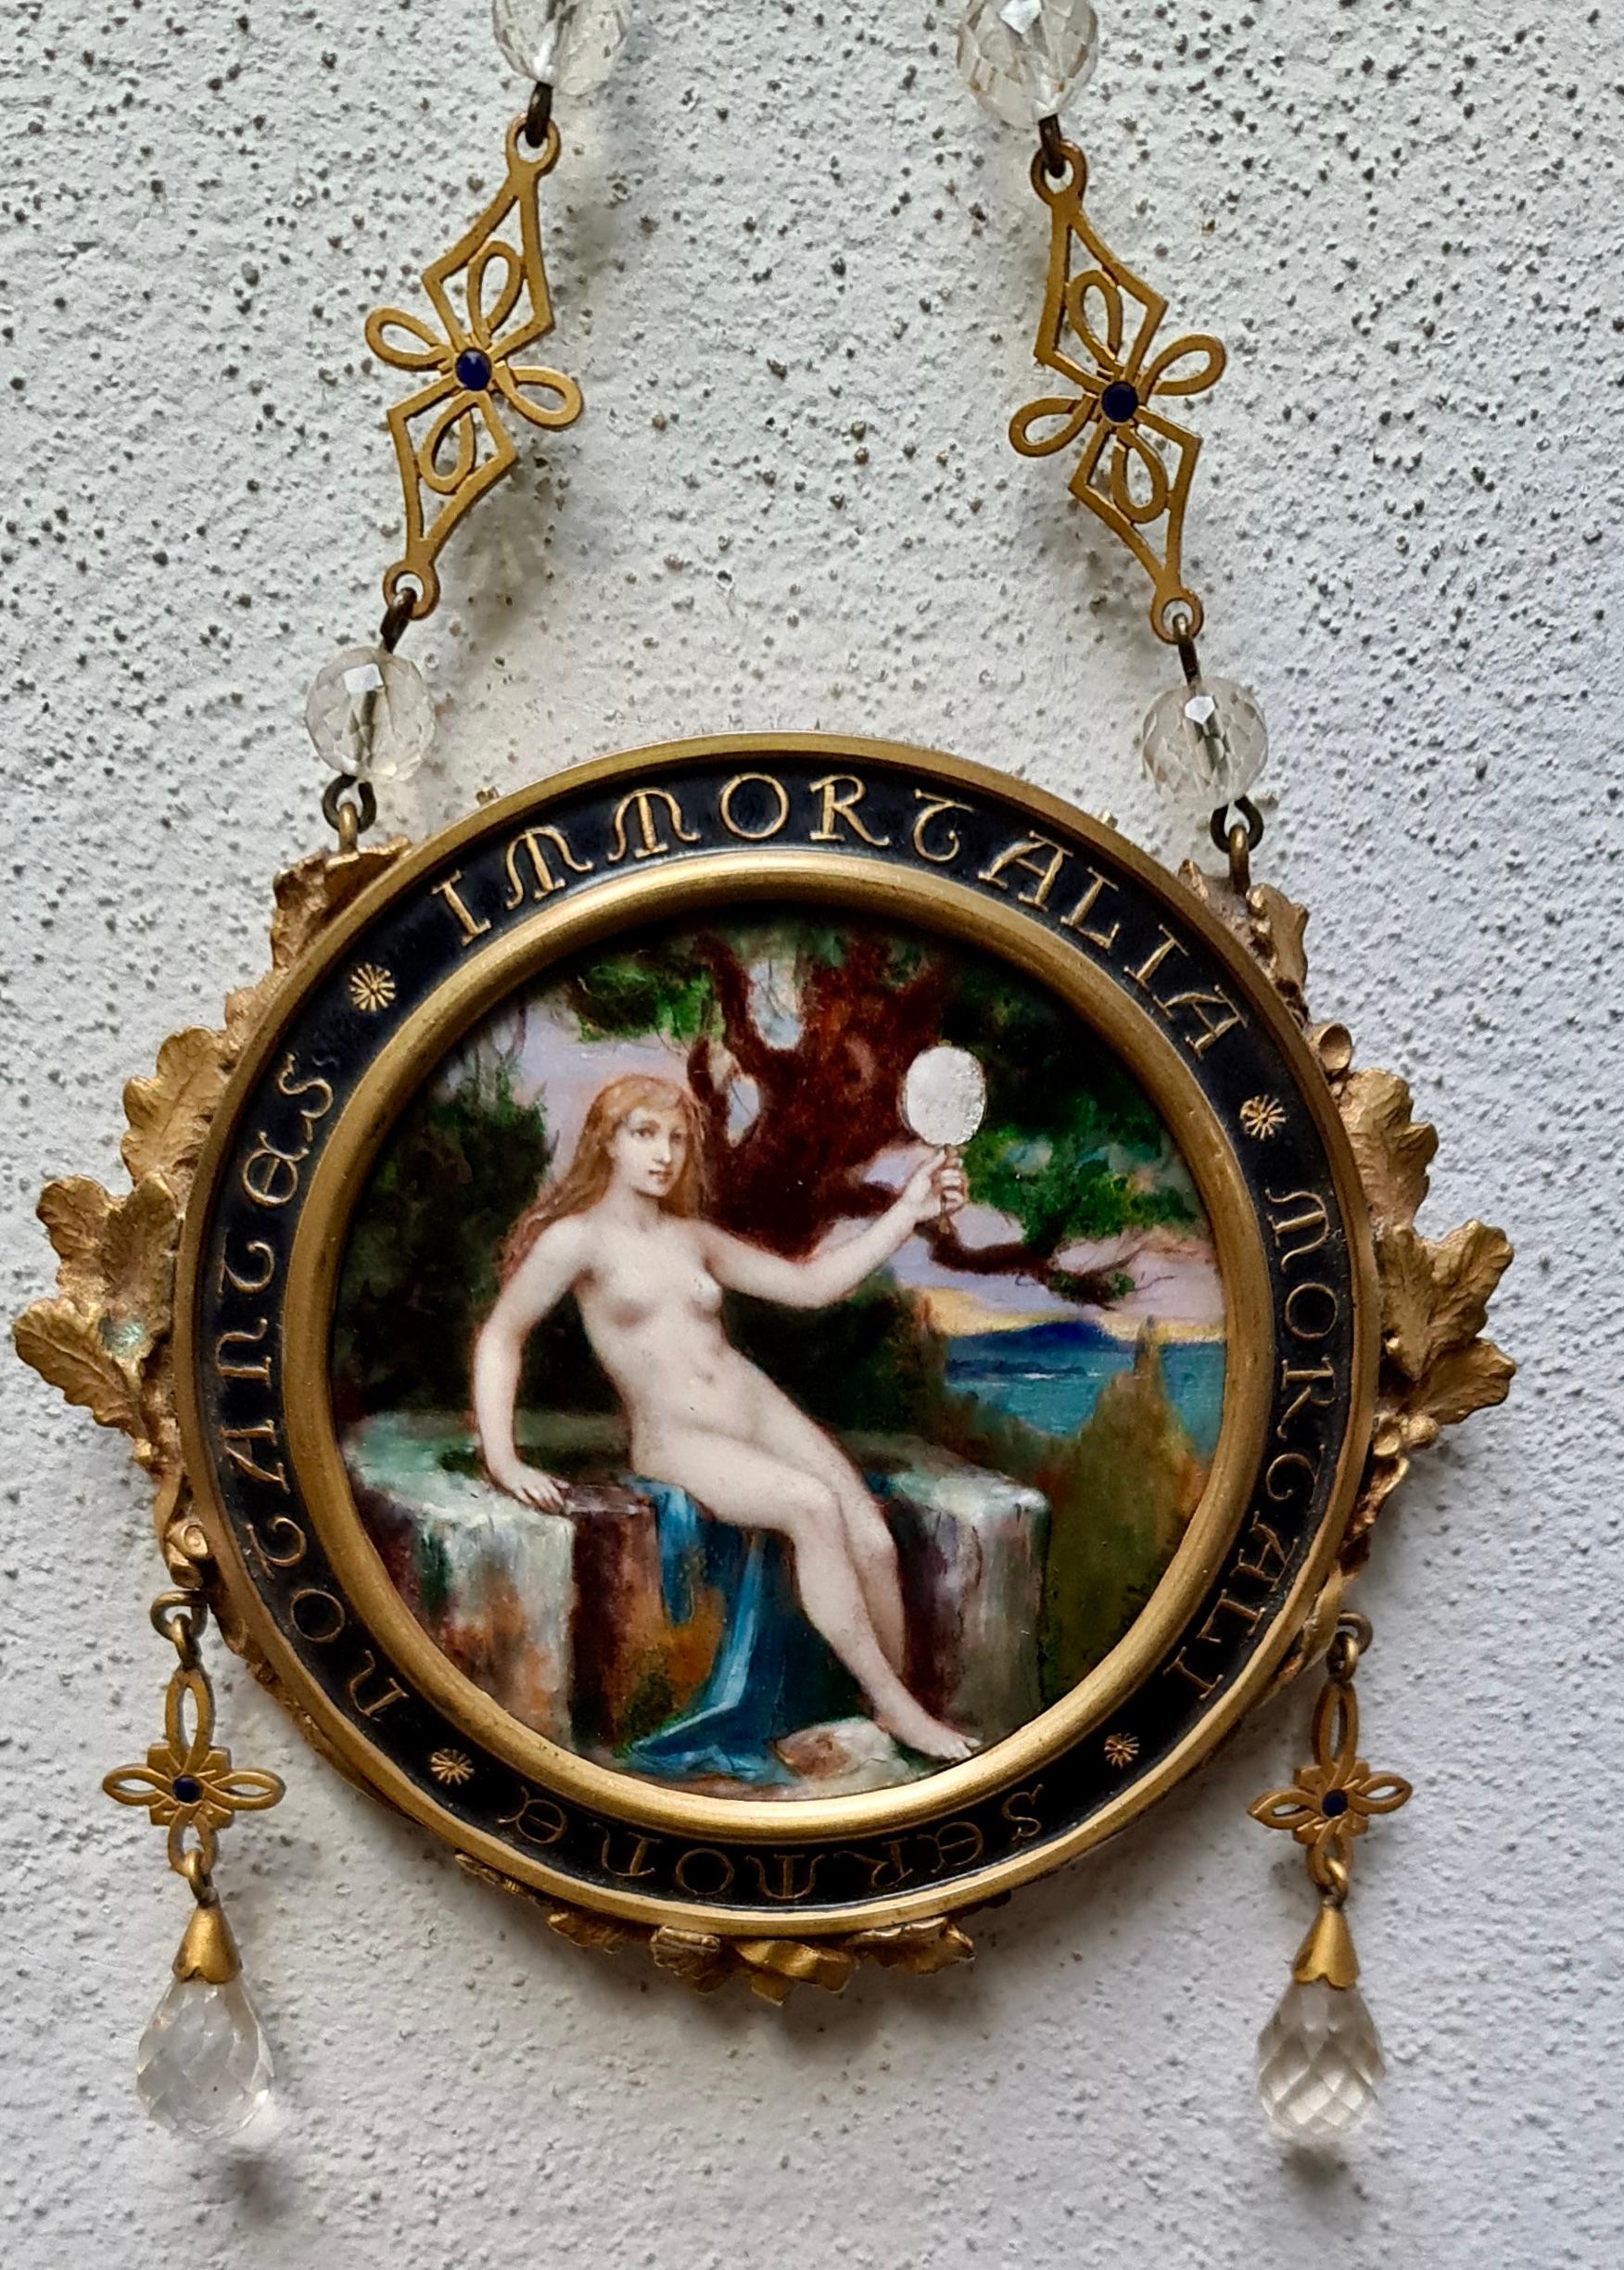 A hanging mirror and very fine painted enamel symbolist plaque by Paul Victor Grandhomme, (1851-1944)
It depicts a naked young woman in a landscape holding a mirror, probably an allegory of sacred love and profane love, all in a chiseled bronze